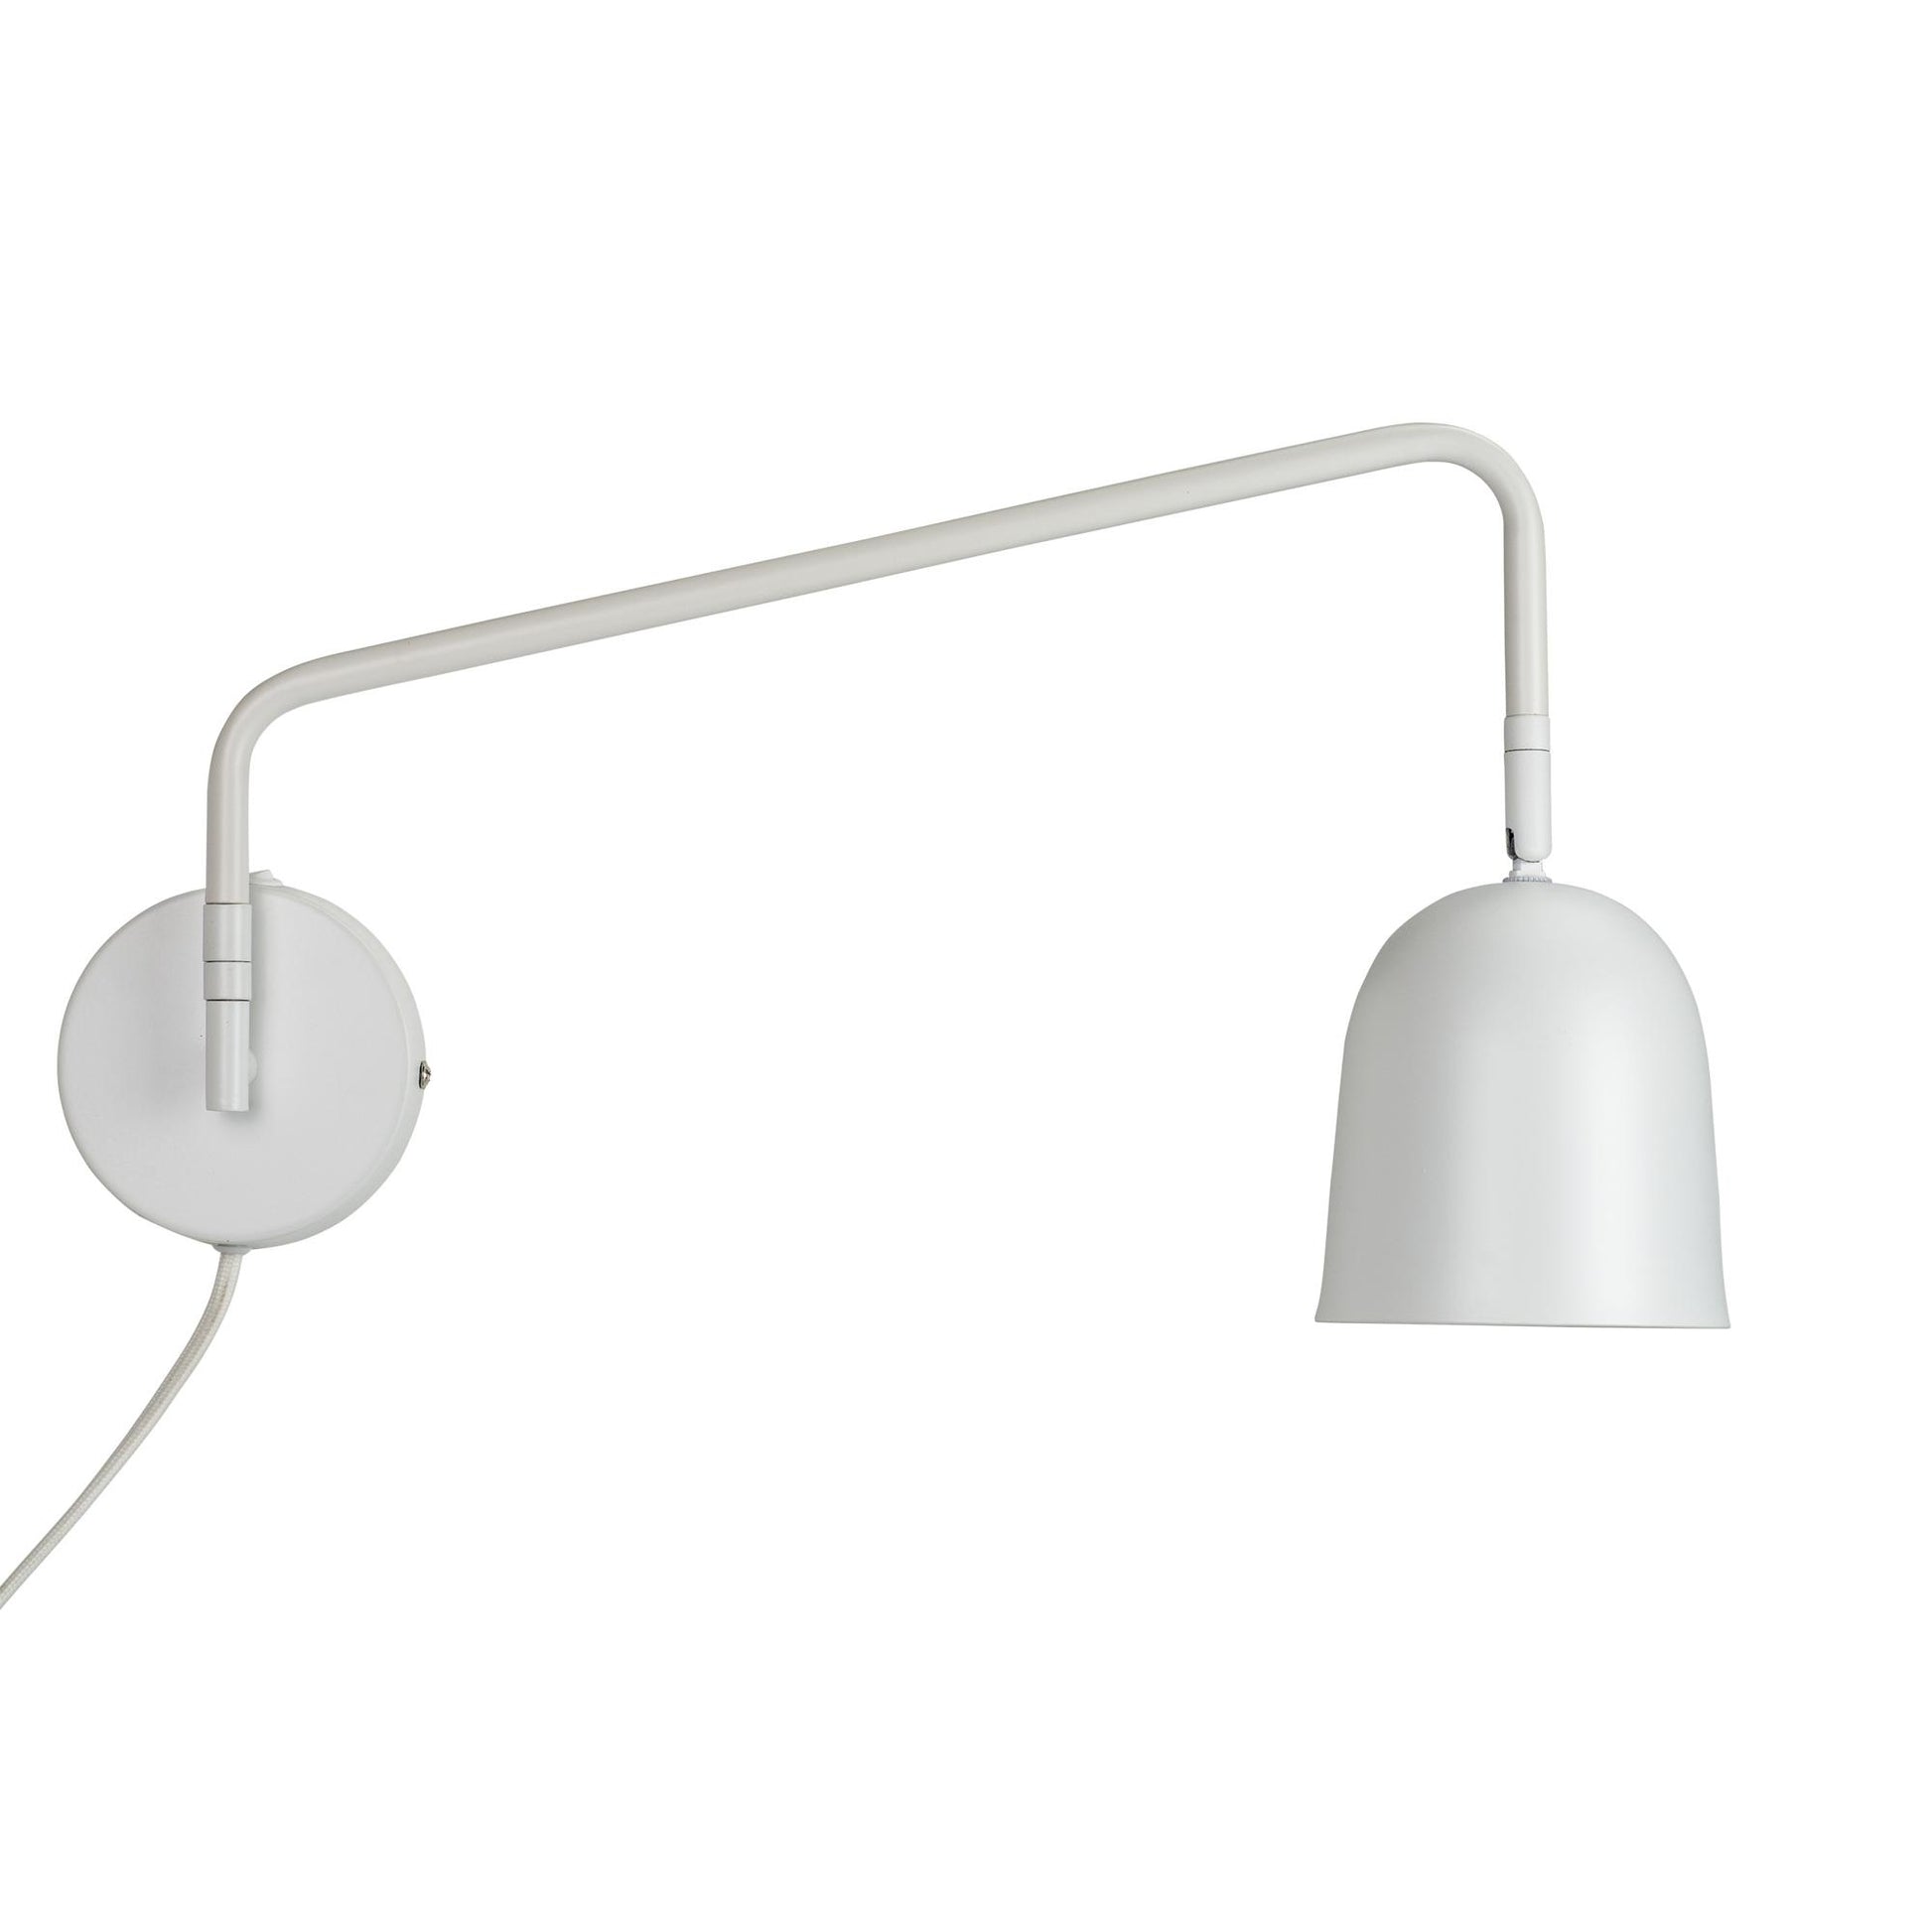 Manchester Wall Lamp by Dyberg Larsen #White